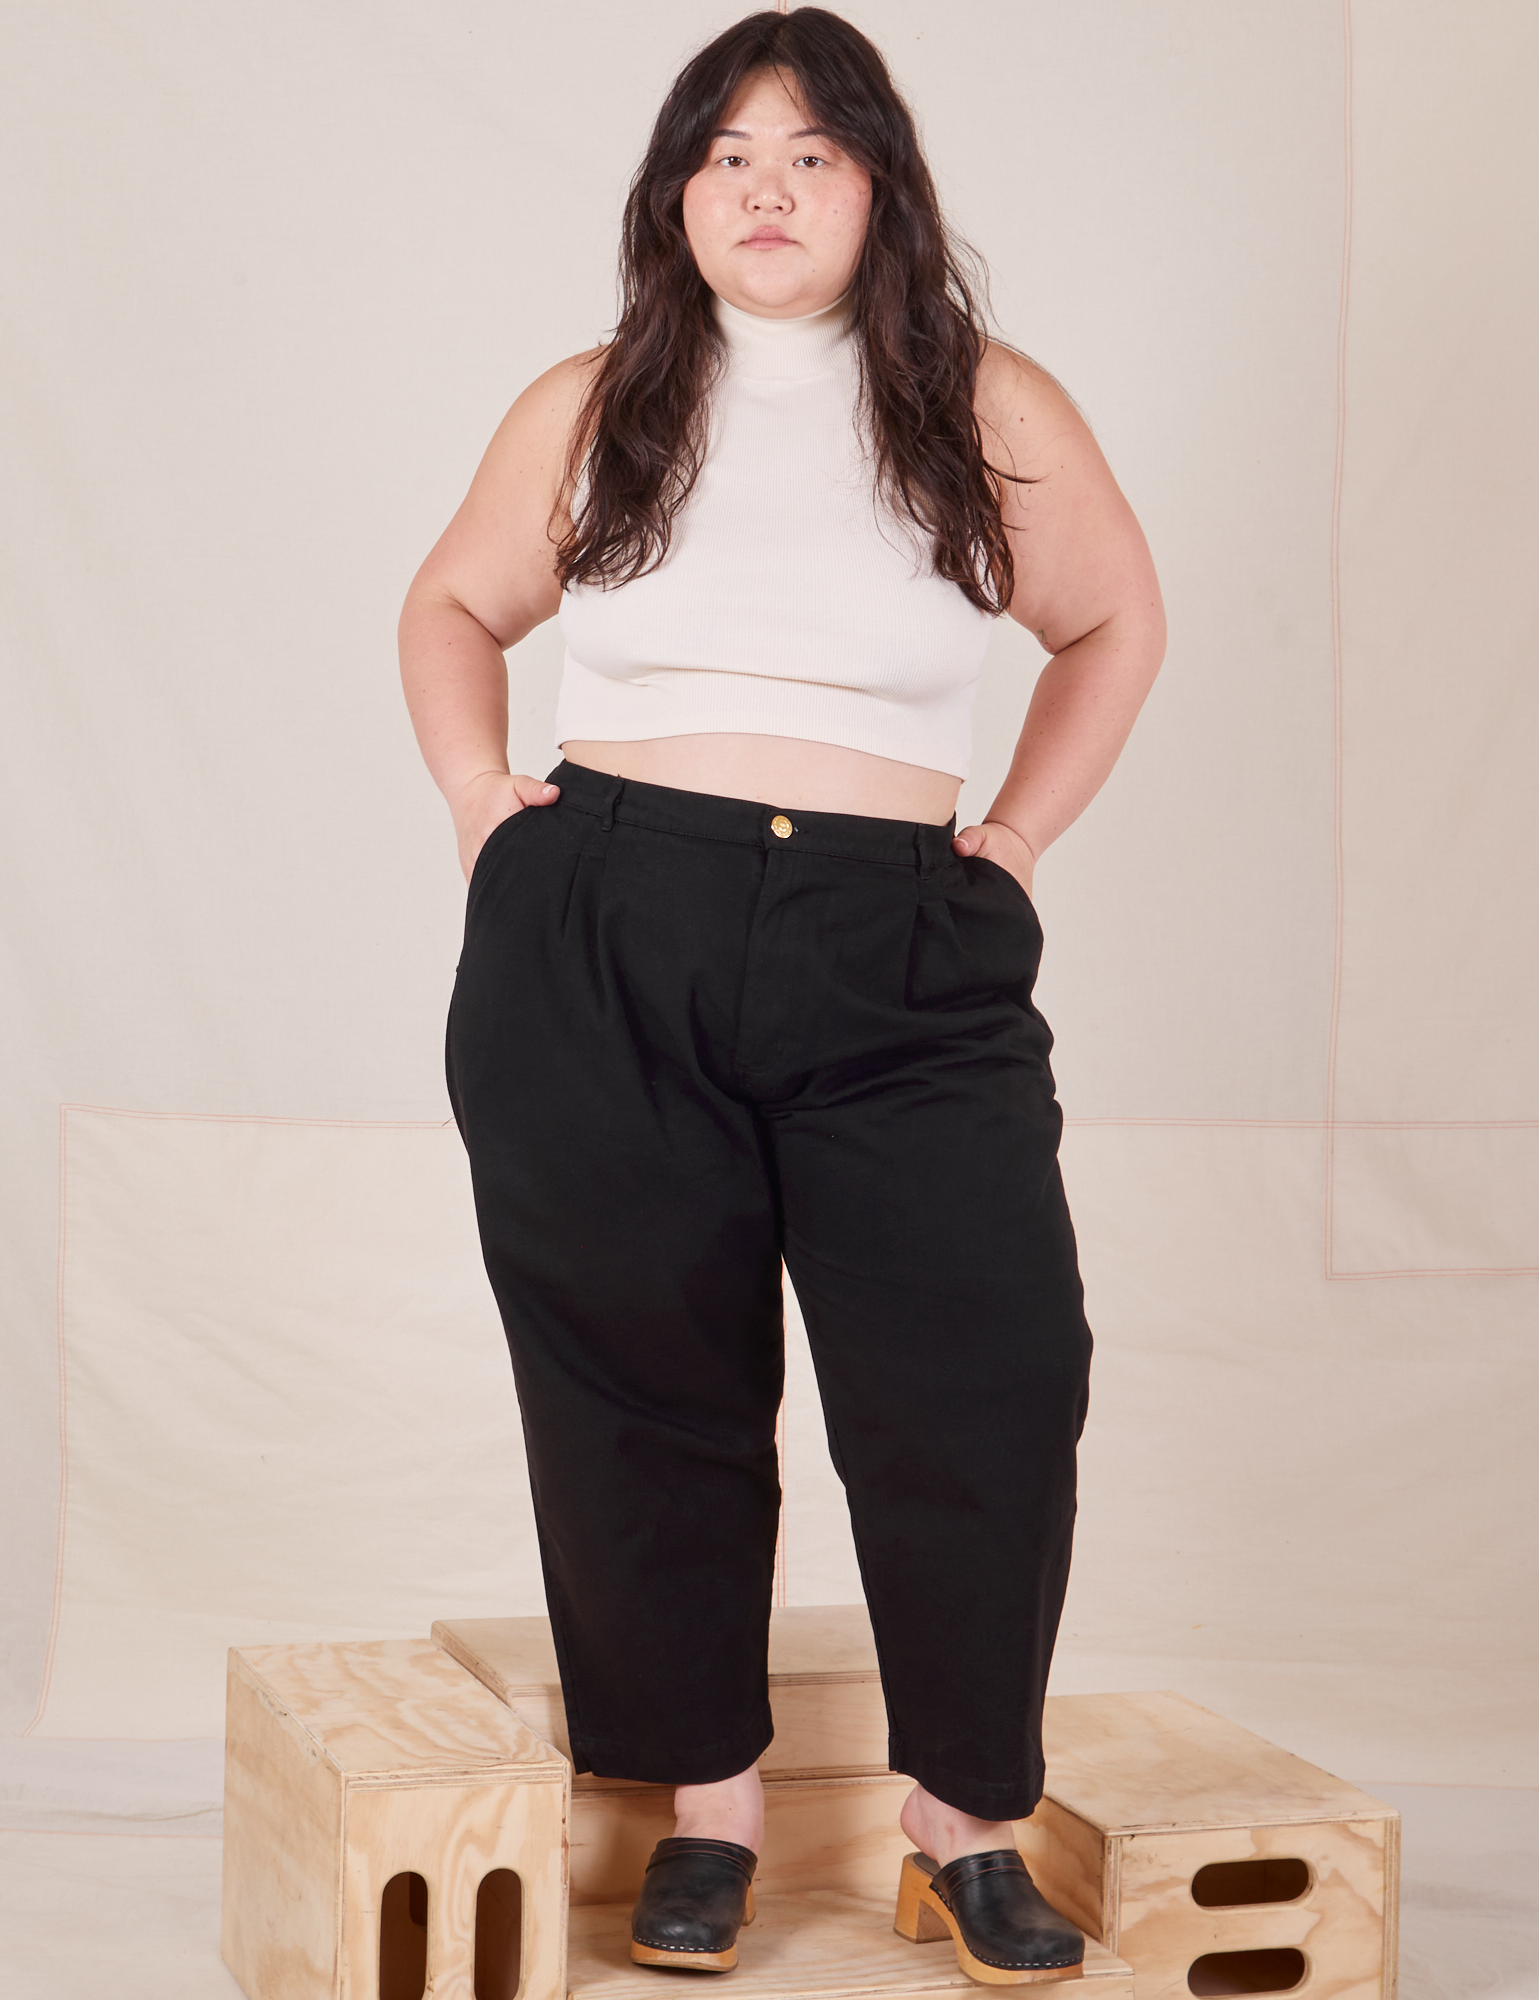 Ashley is 5&#39;7&quot; and wearing 1XL Petite Heavyweight Trousers in Basic Black paired with vintage off-white Sleeveless Turtleneck.